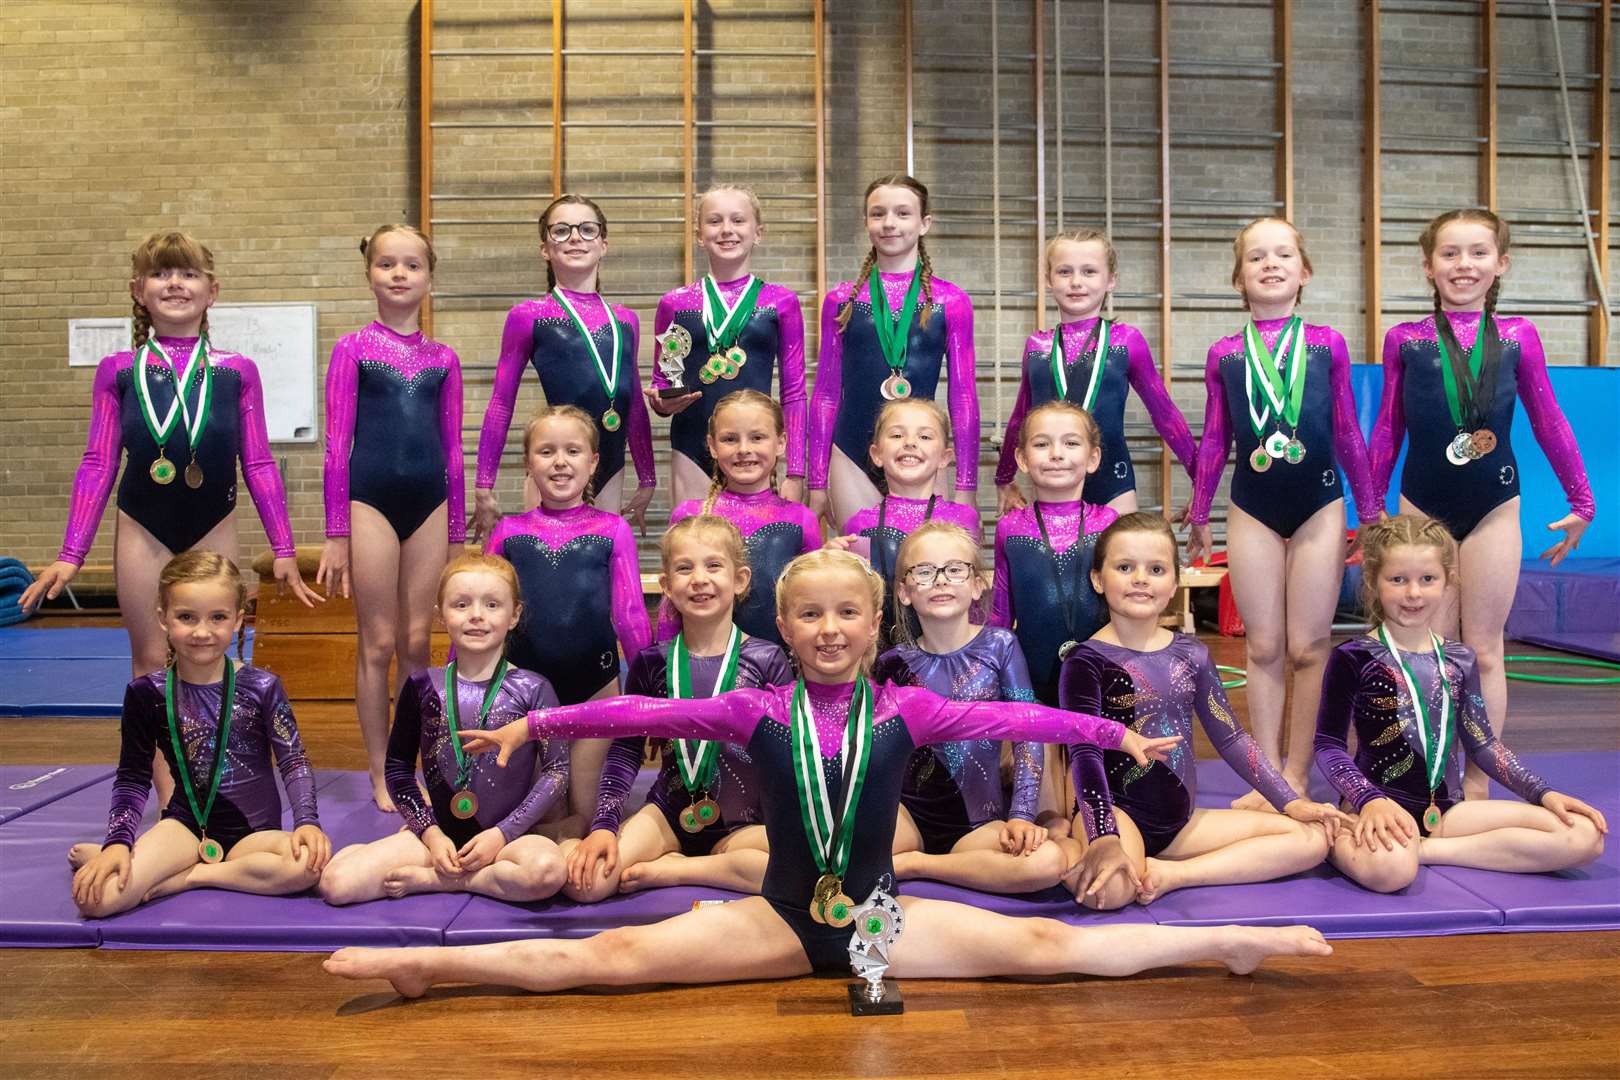 The Forres Gymnastics Club won medals and championship trophies at a competition in Blackburn. Picture: Daniel Forsyth